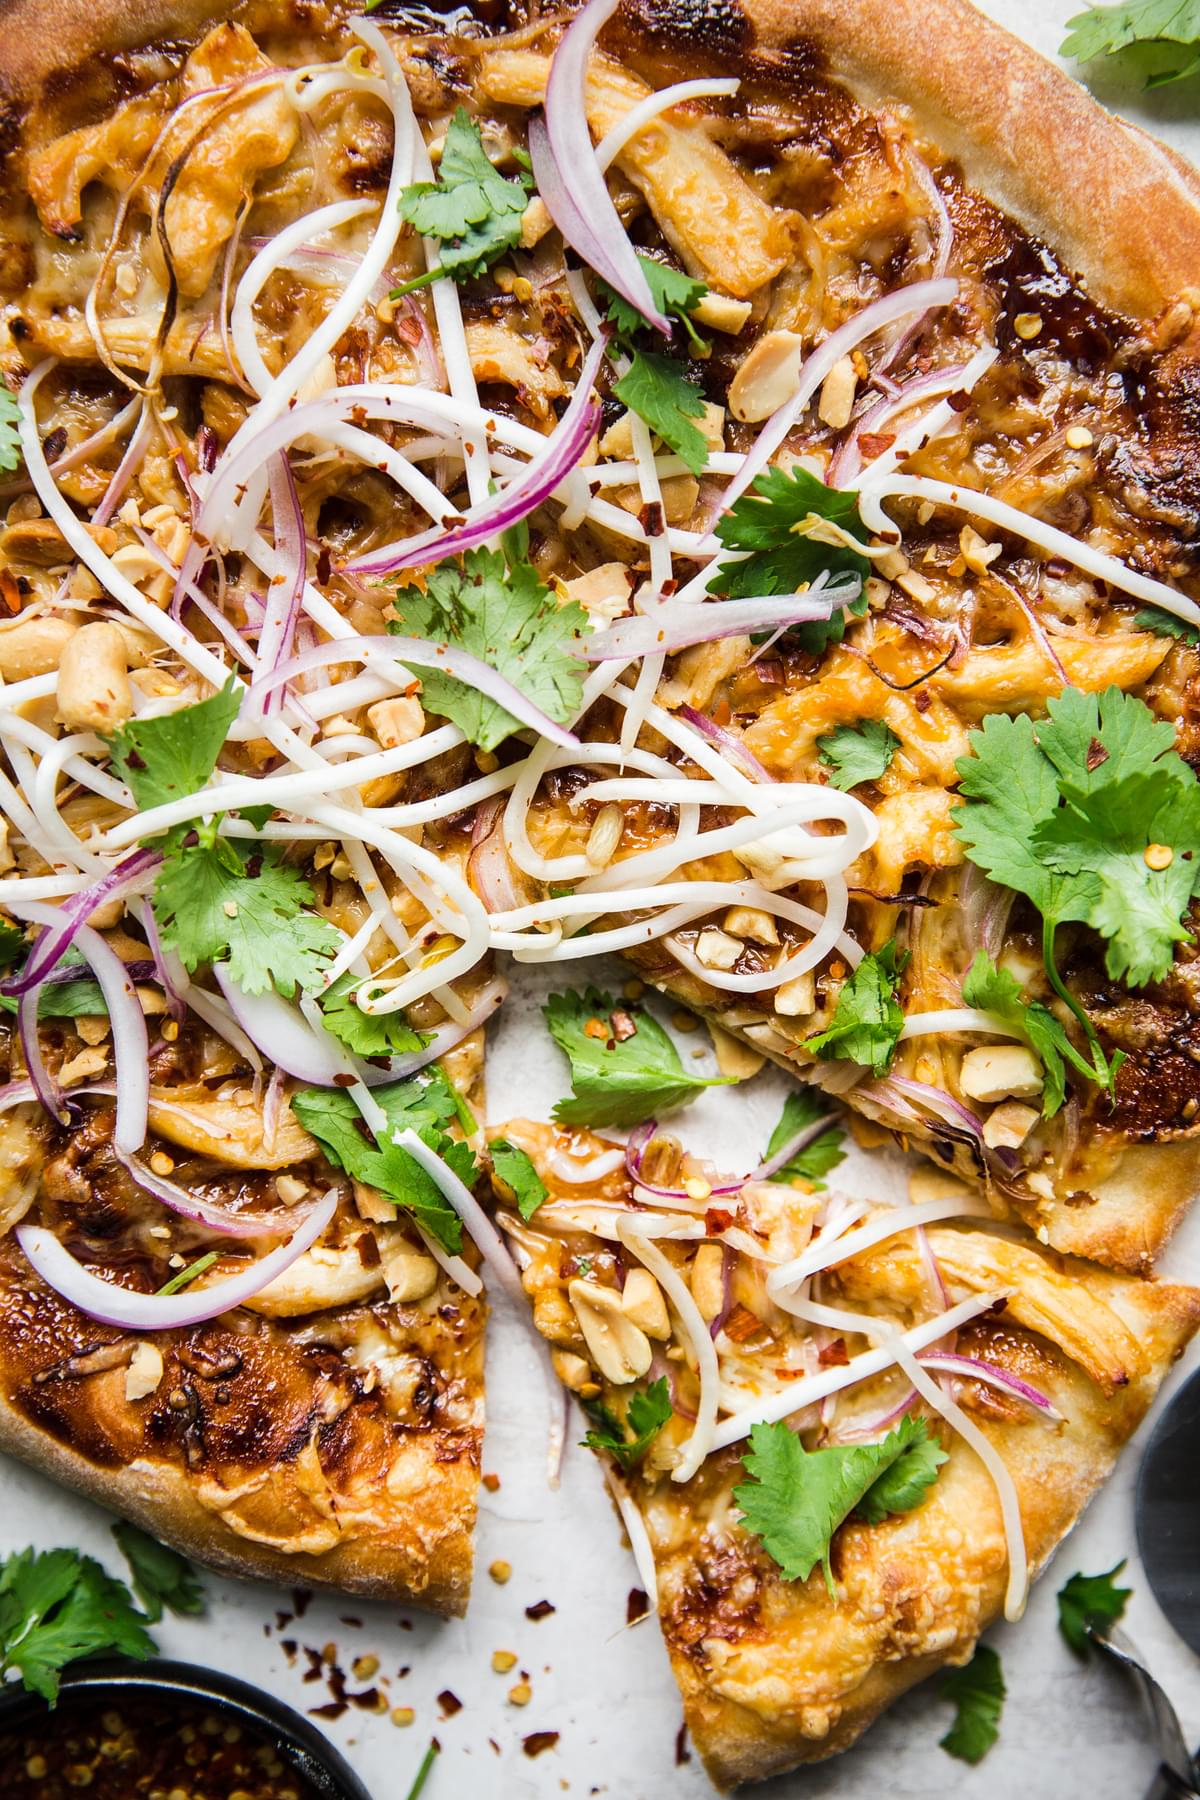 Thai pizza with peanut sauce chicken, hoisin sauce, red onions and cilantro